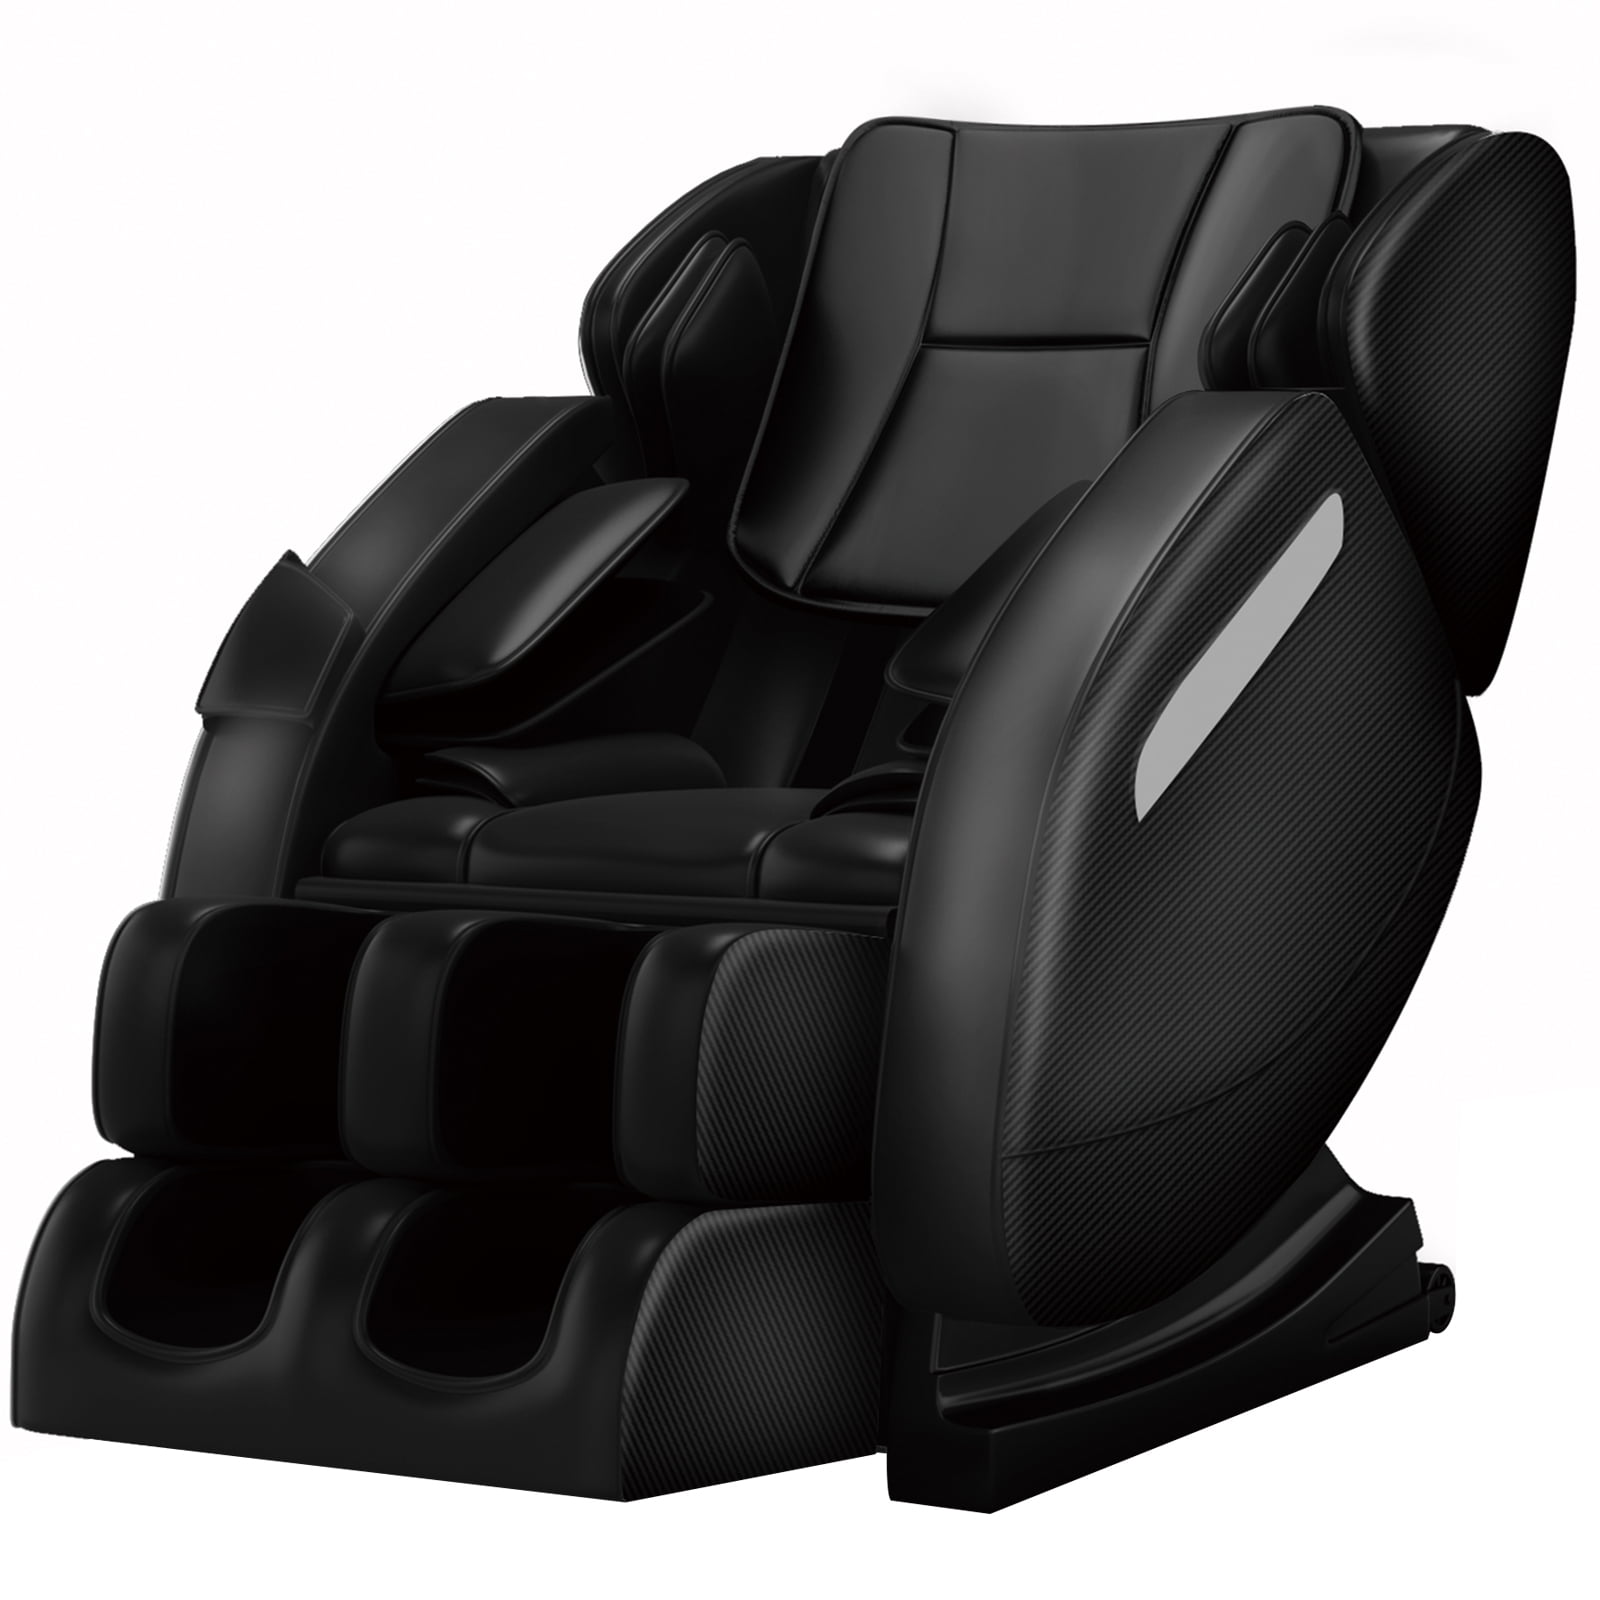 Real Relax Full Body Recliner Massage Chair with Air Pressure, Bluetooth, Heat and Foot Roller